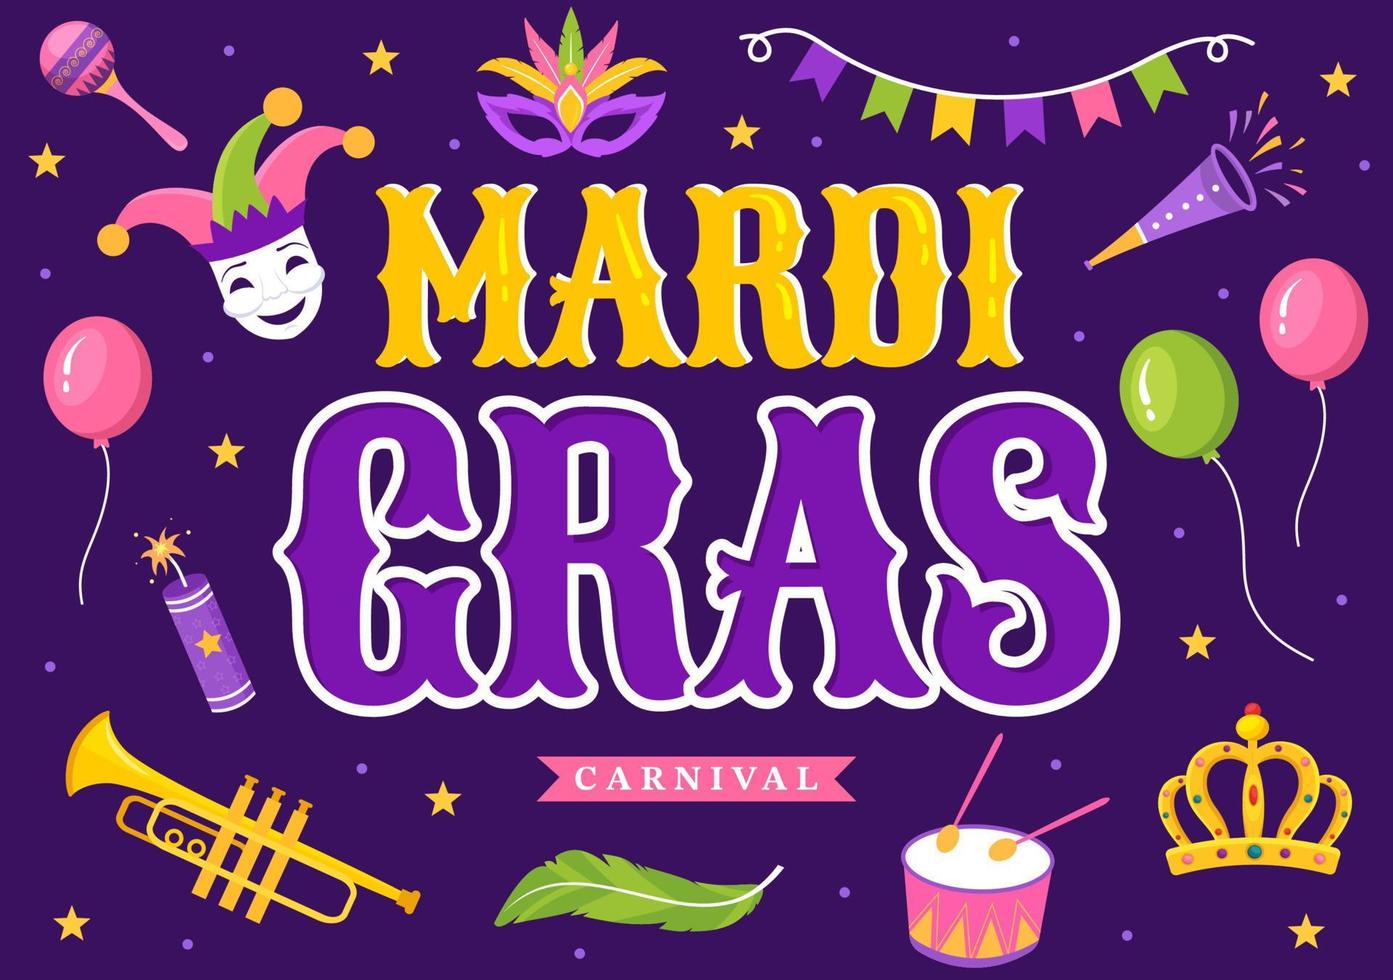 Mardi Gras Carnival Party Illustration with Mask, Feathers and Item Festival for Web Banner or Landing Page in Flat Cartoon Hand Drawn Templates vector